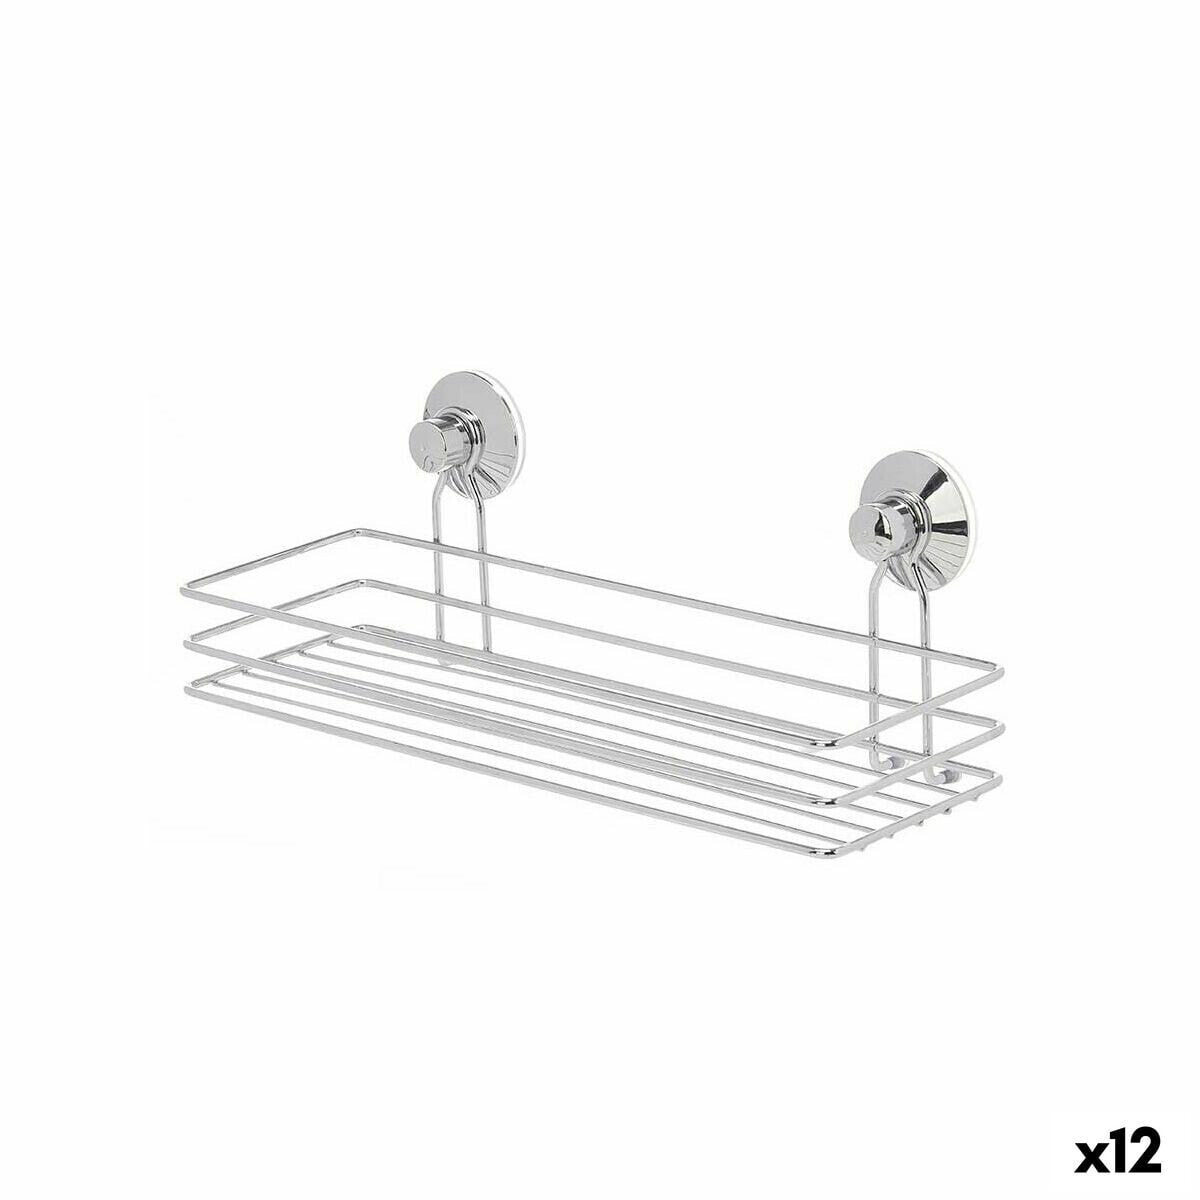 Shower Support Steel ABS 35 x 13 x 13 cm (12 Units)